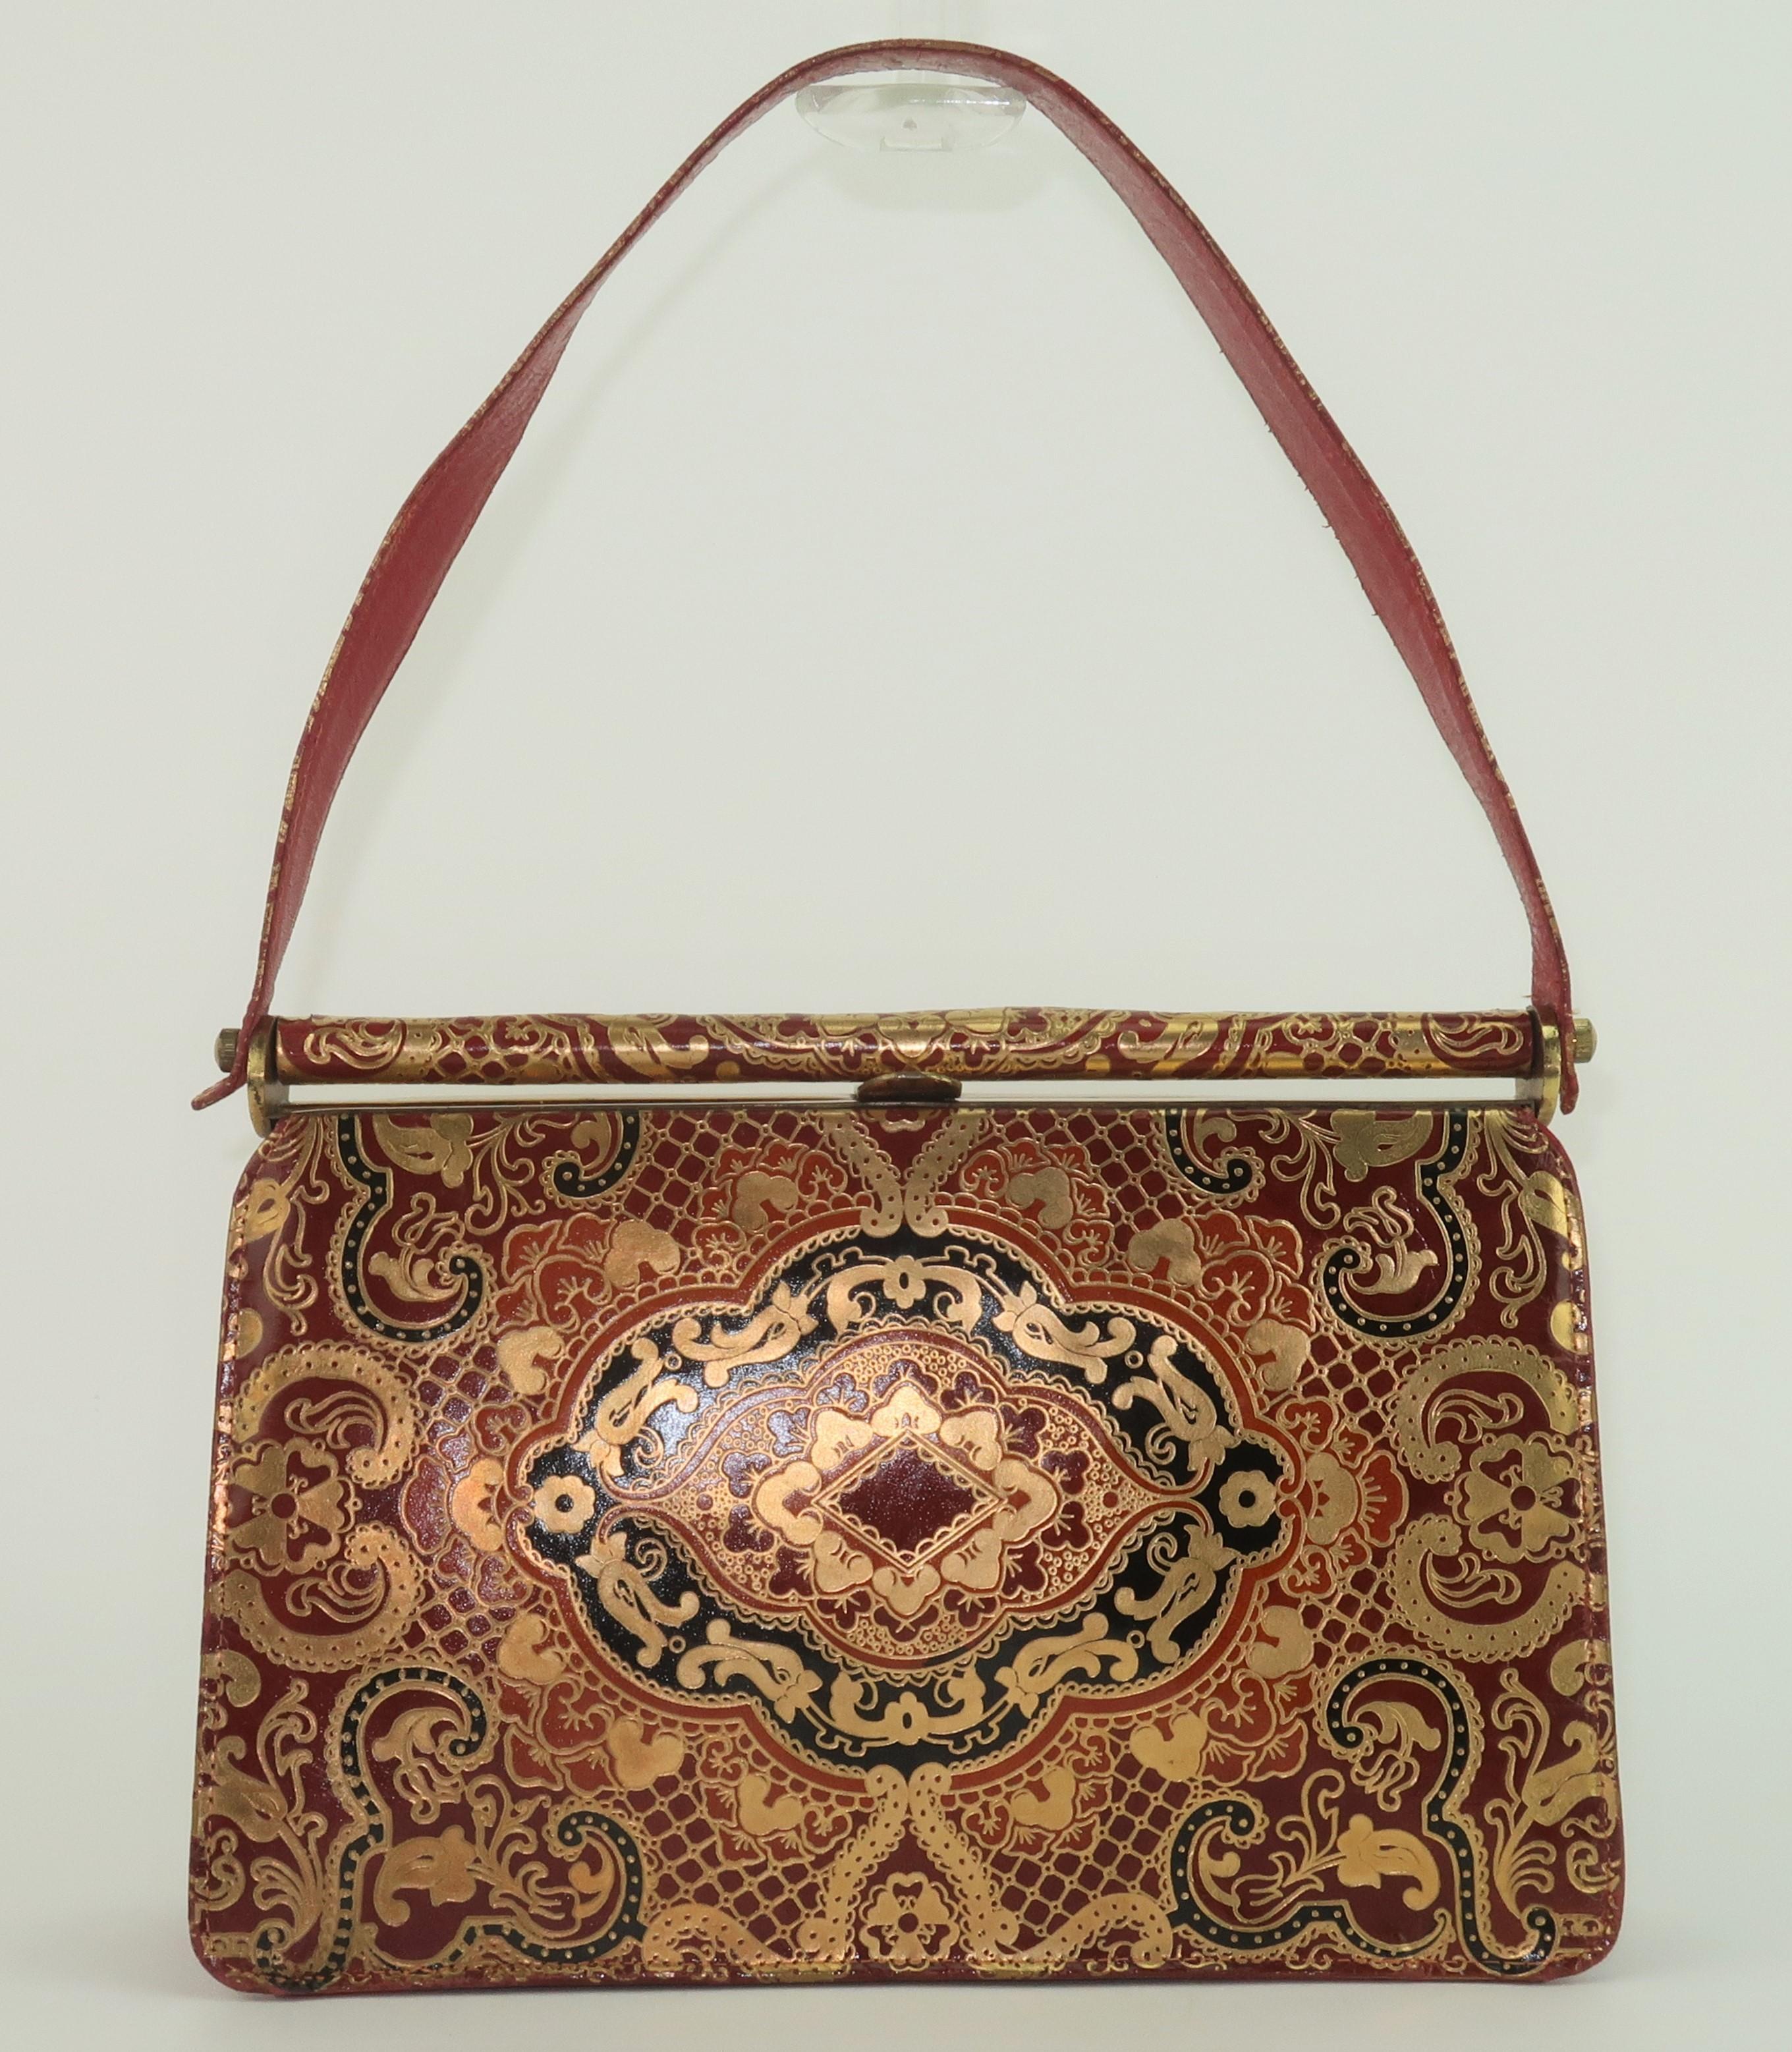 The golden romance of Venetian style tooled leather is truly a fashion staple with a timeless beauty.  This 1950's Italian handbag has a classic top handle silhouette in a rich and elegant gold and deep red tooled leather with black accents.  The